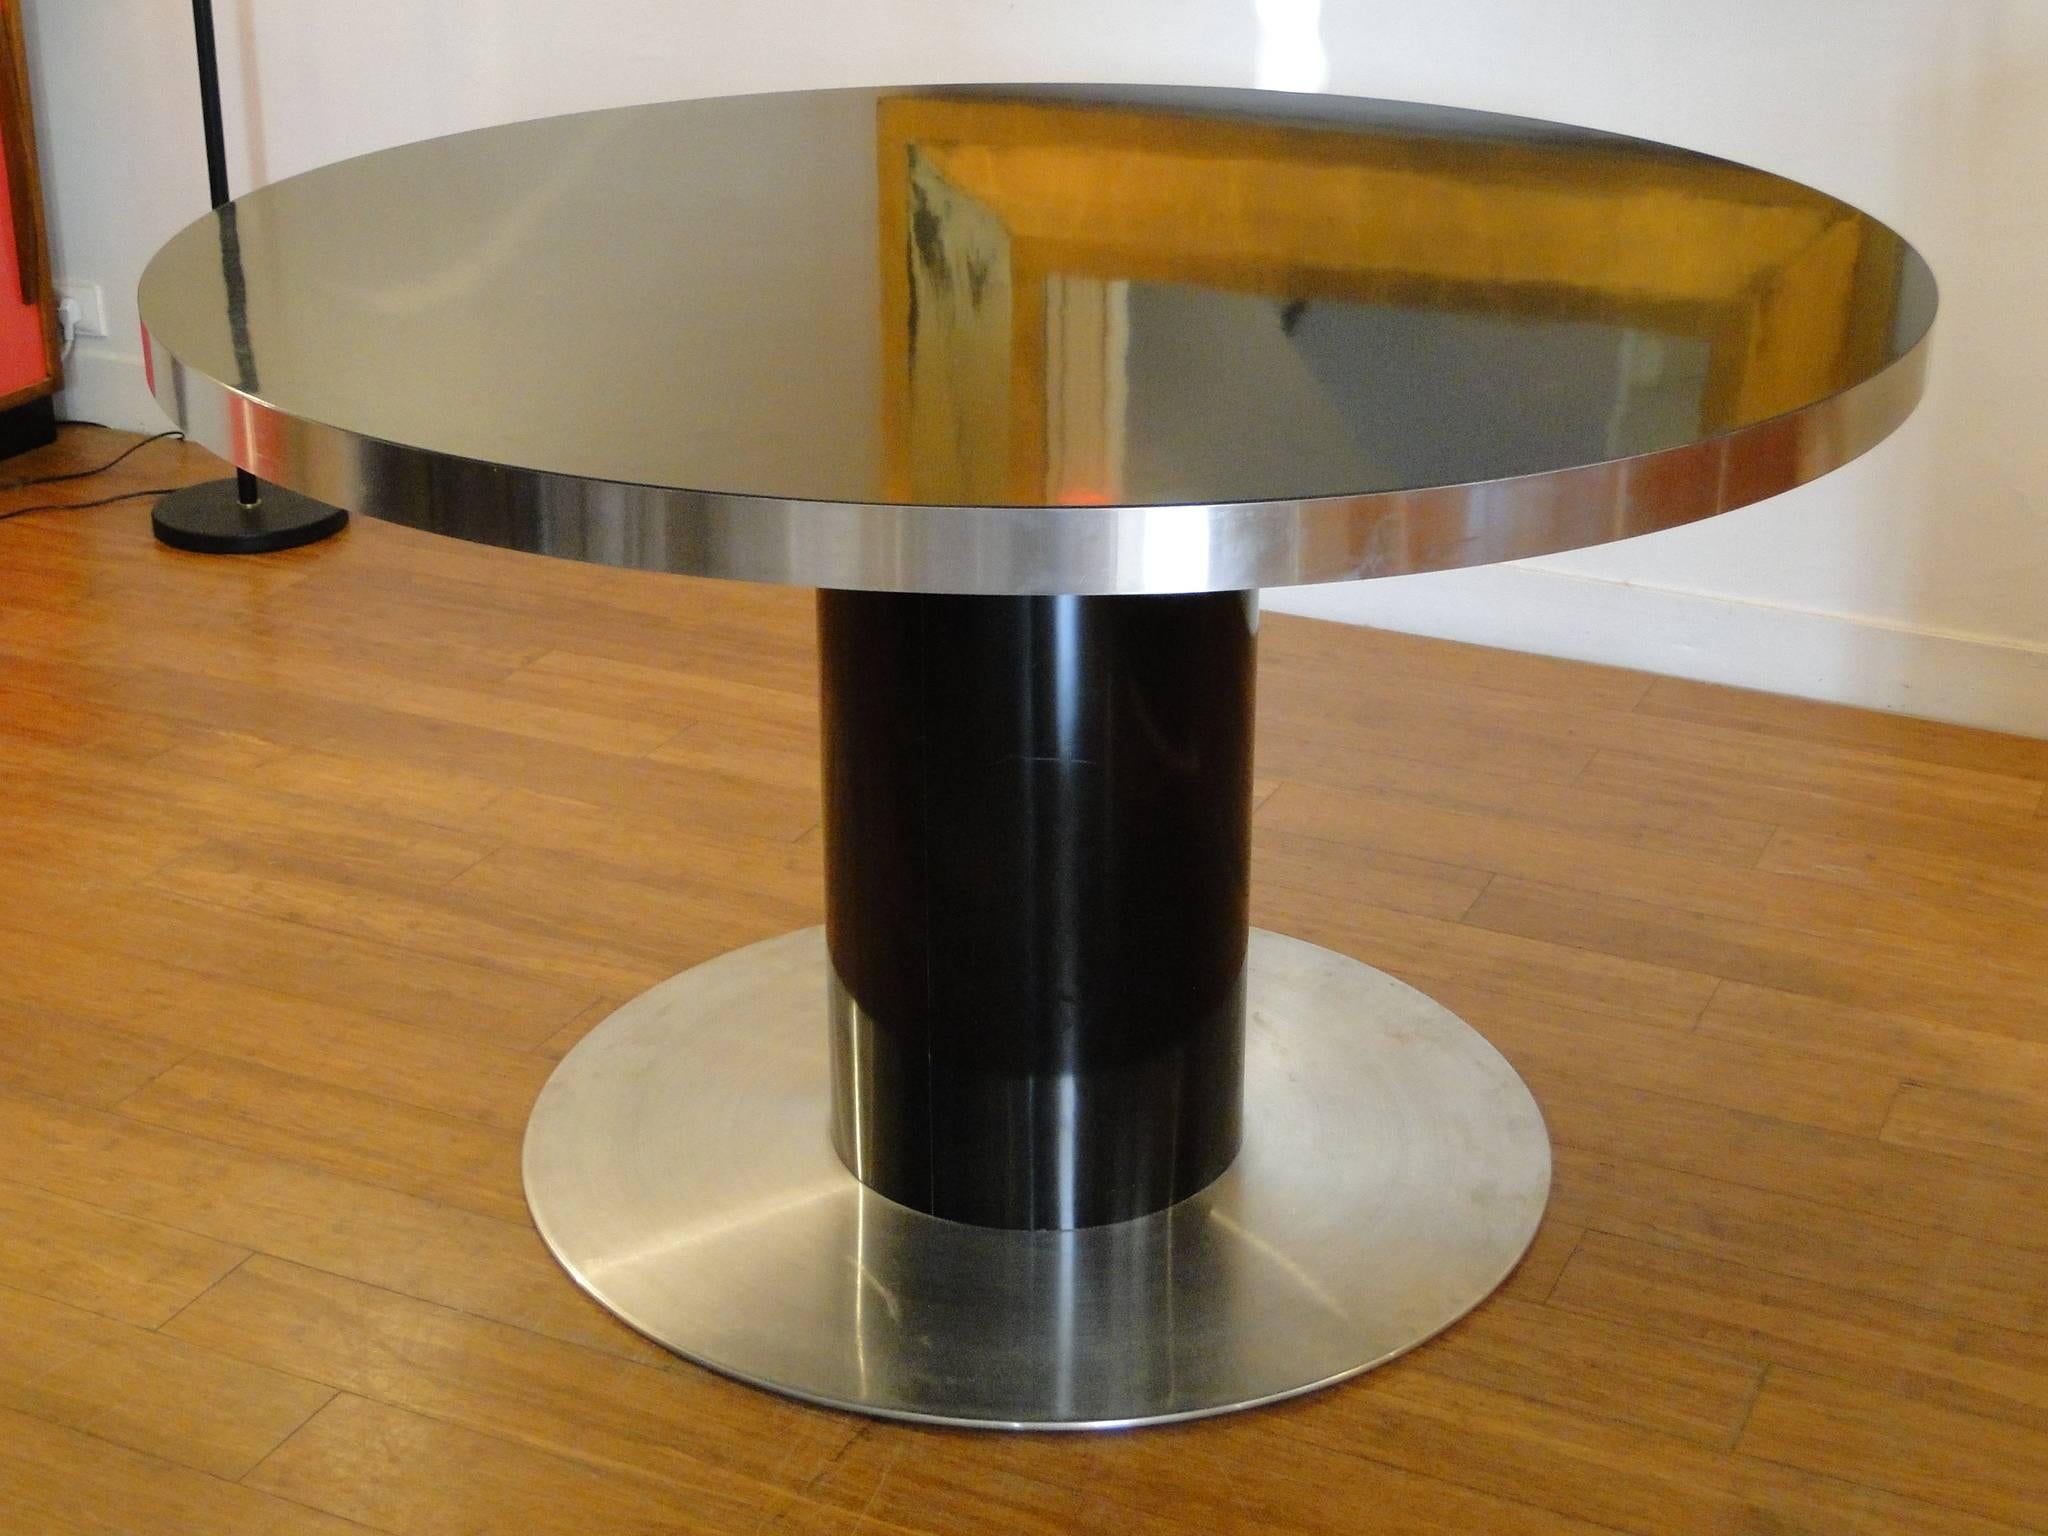 Willy Rizzo dining table model "savage" edited by Mario Sabot, circa 1970, in good condition, brushed aluminium.
Willy Rizzo is best known as a photographer. He began his illustrious 20 year career with Paris Match in 1948 which lead to